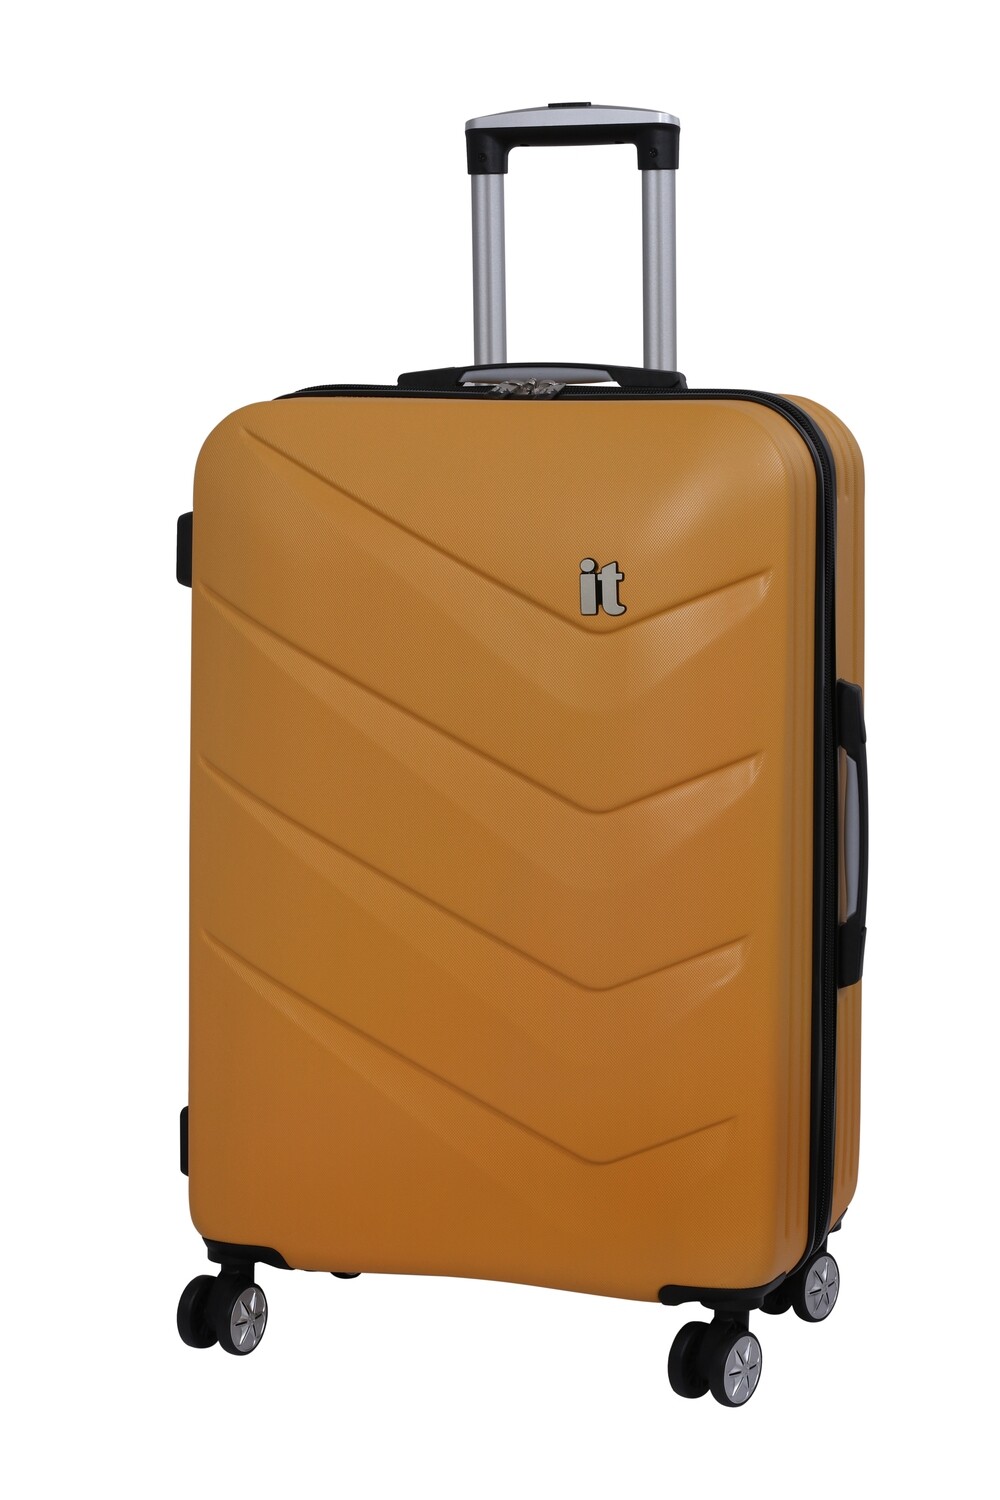 IT LUGGAGE CHEVRON 26" STRONG TROLLEY OLD GOLD